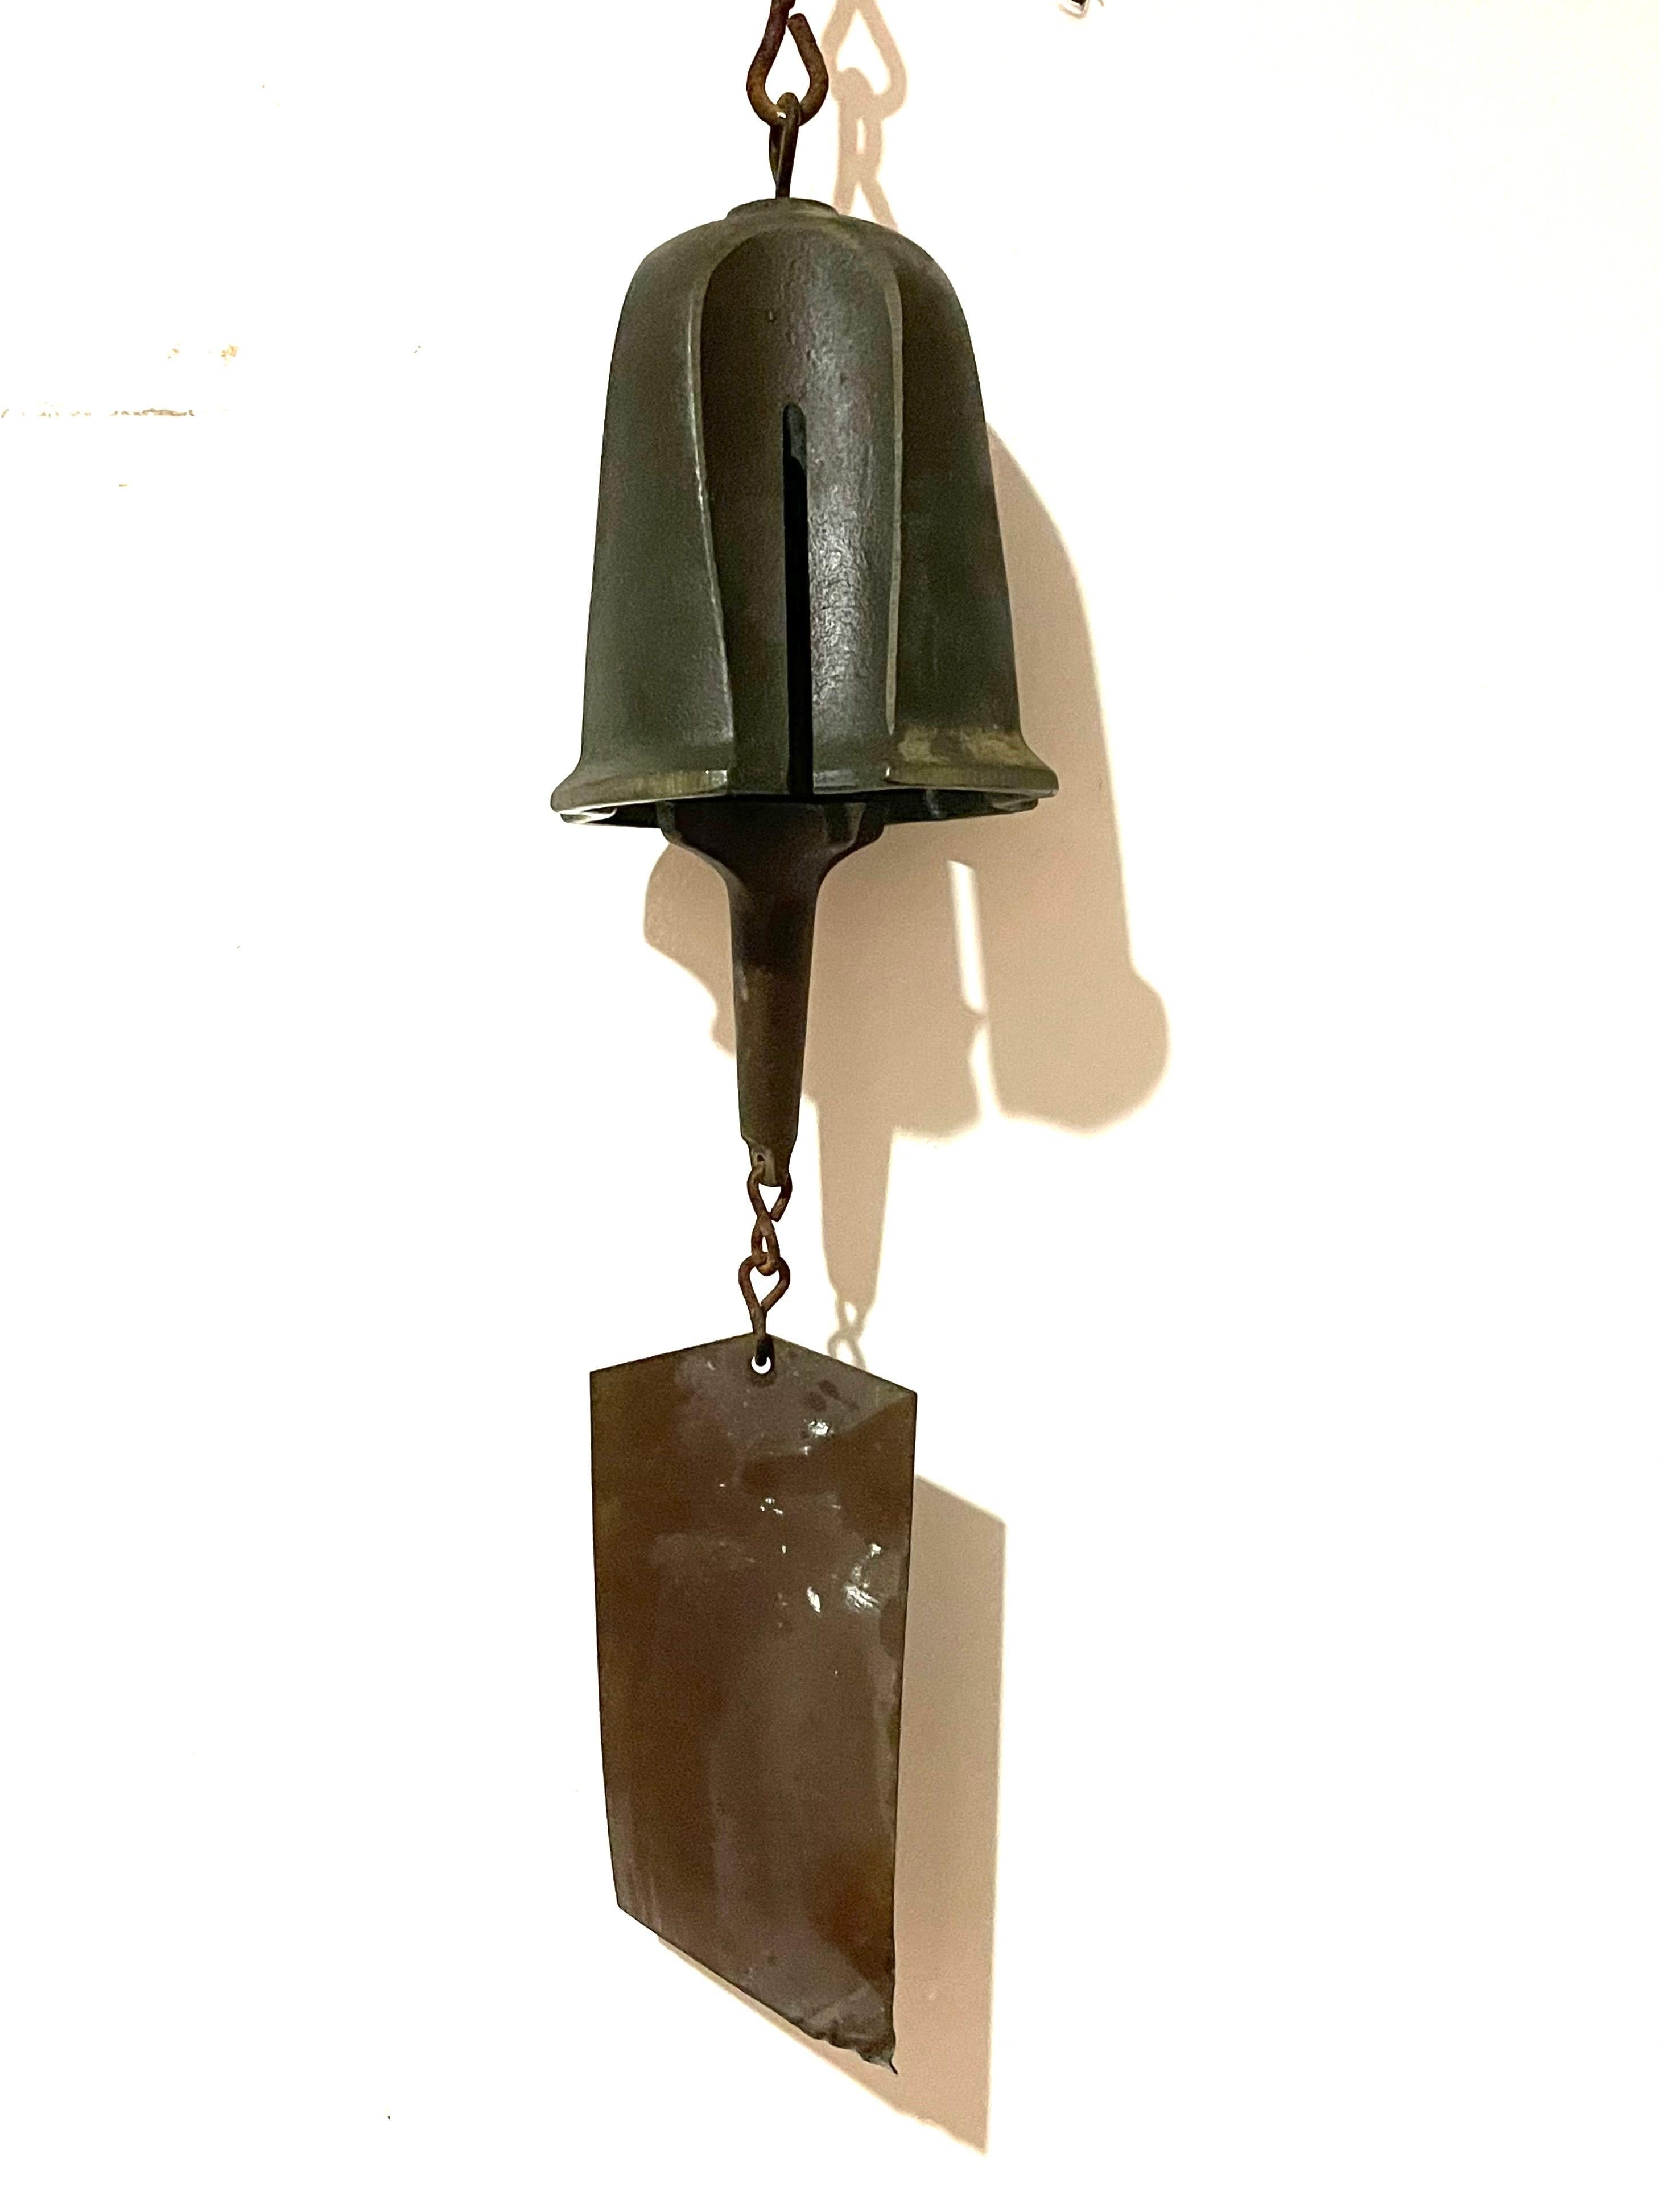 Vintage bronze Cosanti bell by Paolo Soleri. Uncommon shape and design. Fantastic patina and a great sound. 

Paolo Soleri (1919-2013), the founder of Cosanti and Arcosanti, was an important artist, architecture, philosopher and urban planner. The